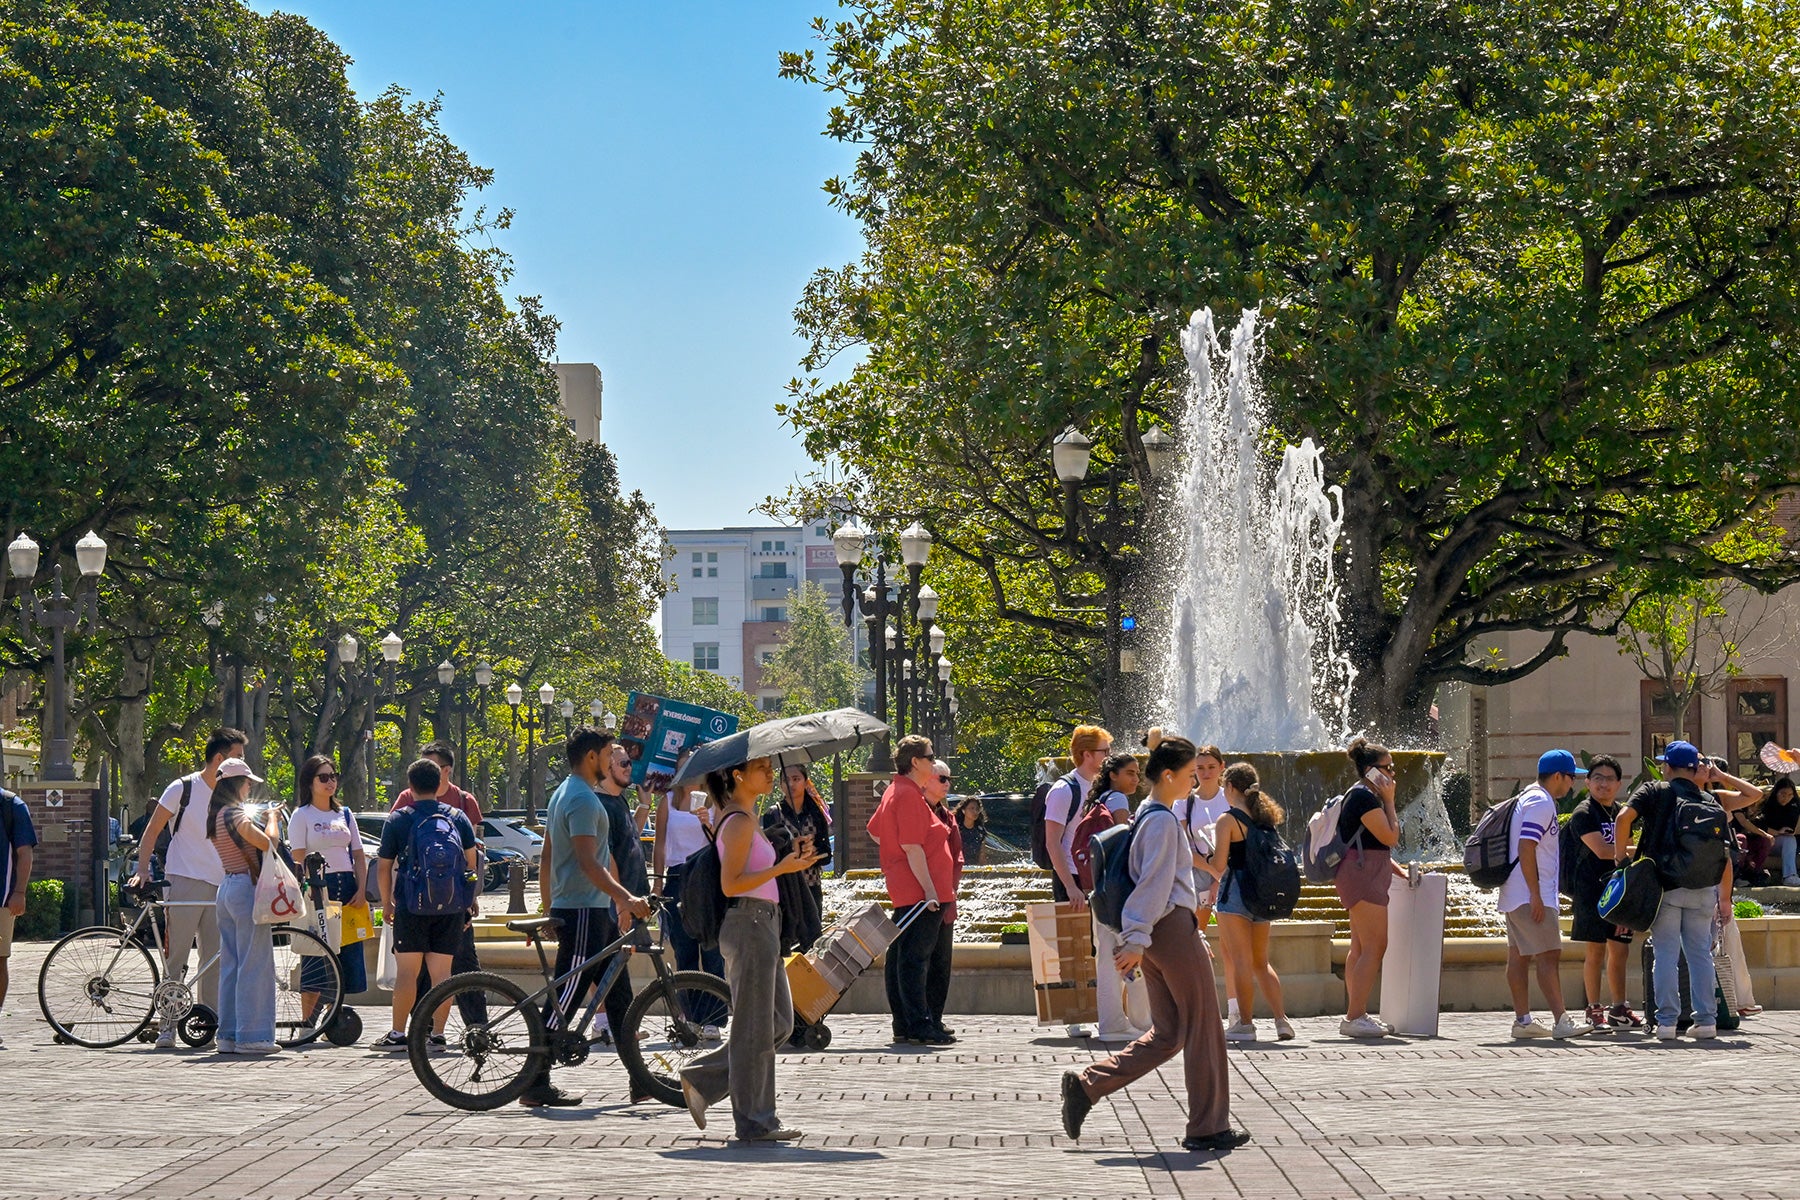 USC campus photos: fountain surrounded by people